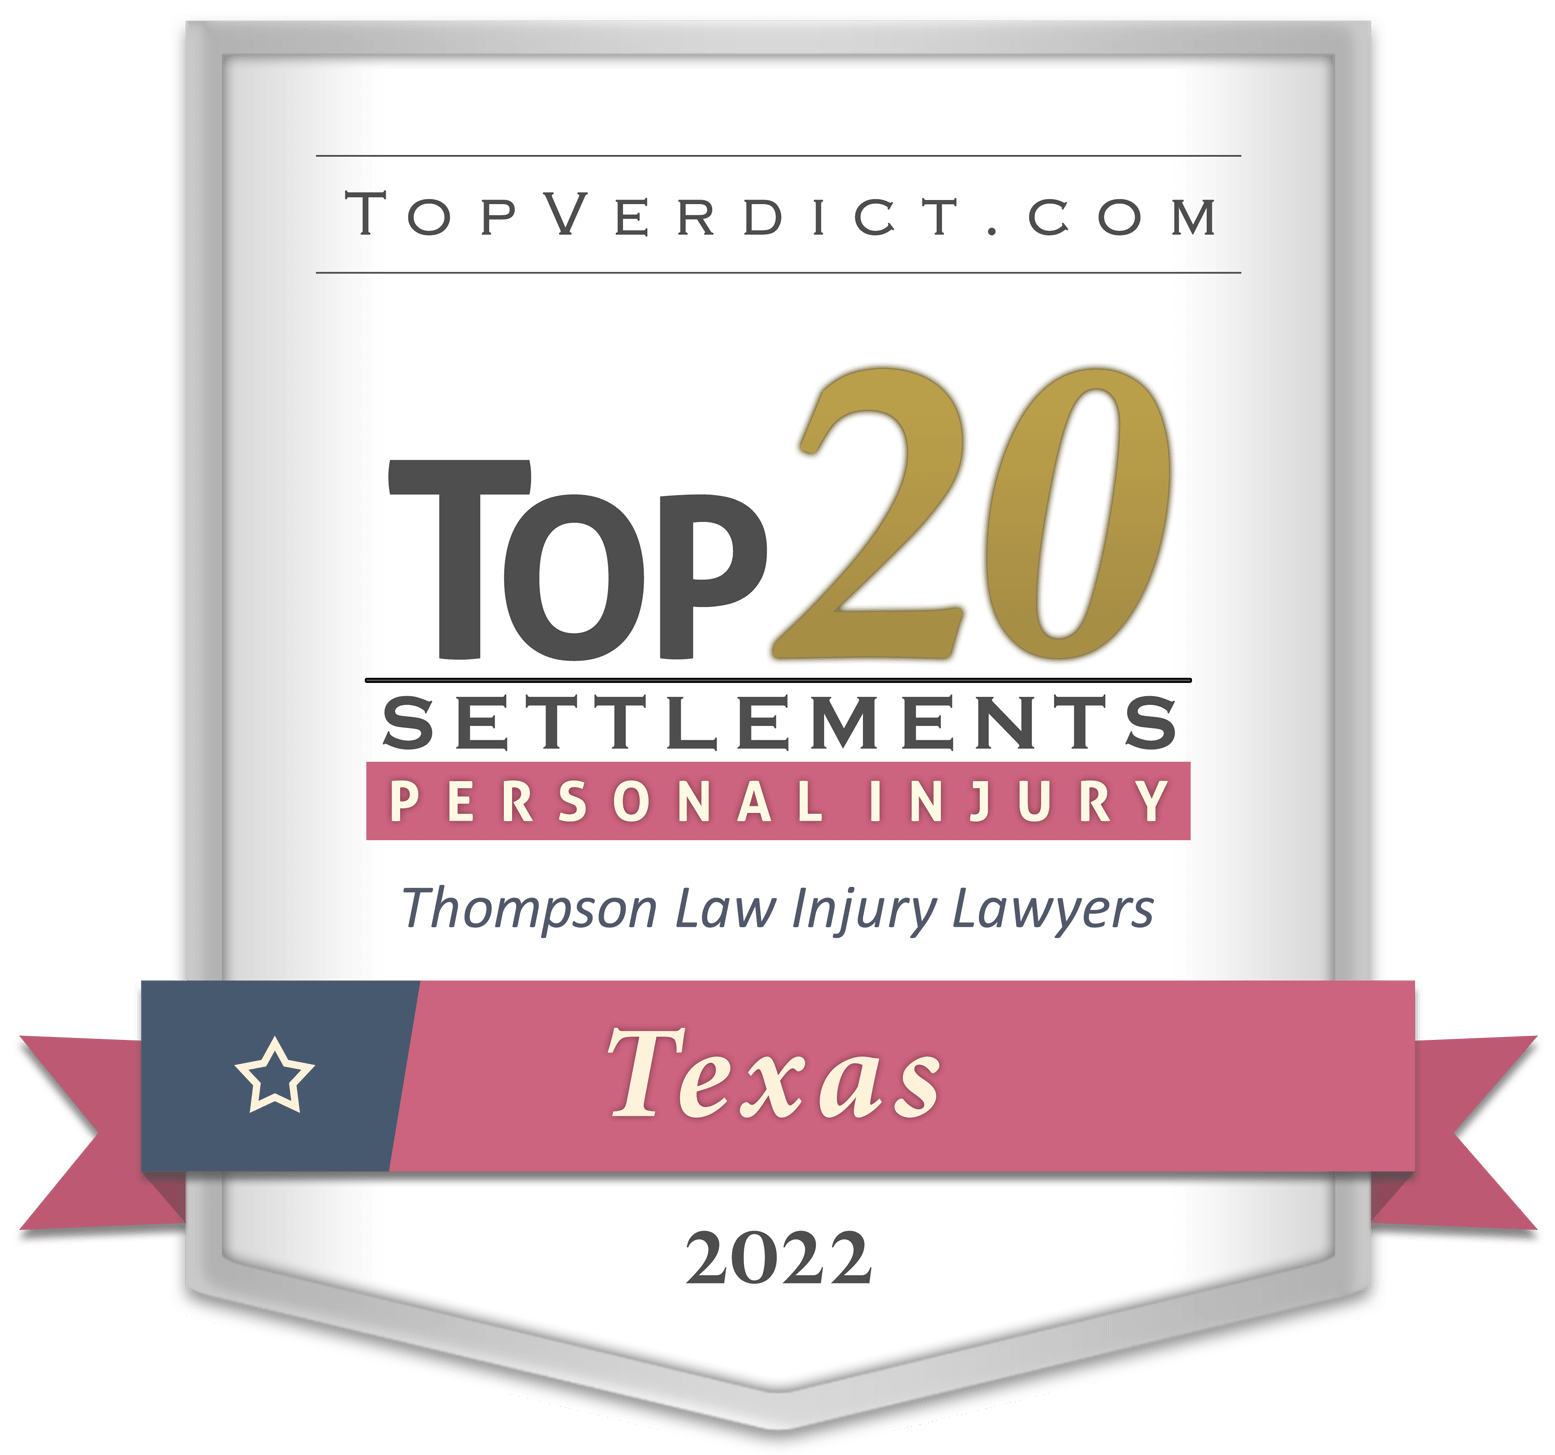 Top 20 Personal Injury Settlements in Texas 2022 - Round Rock Truck Wreck Lawyers